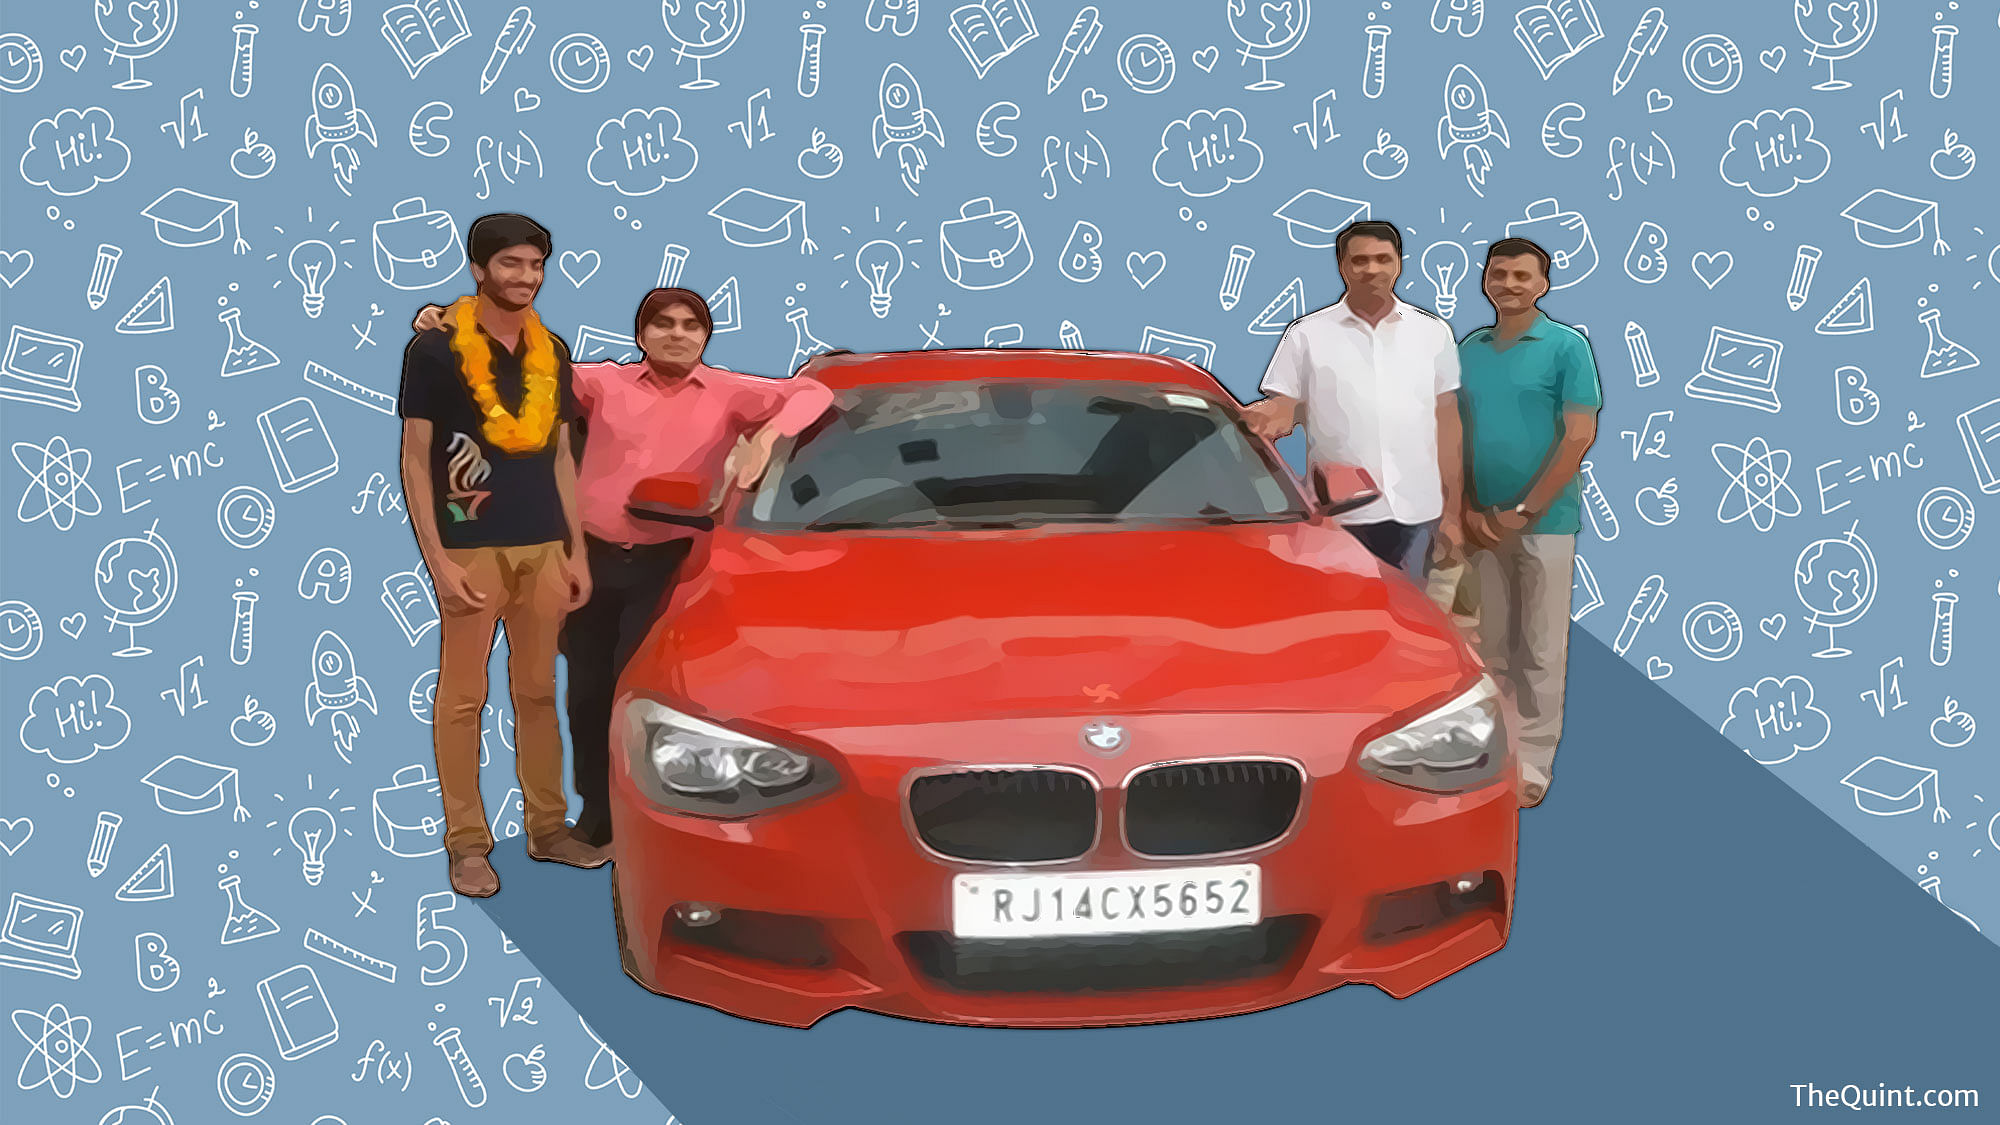 Tanmay Shekhawat is now the proud owner of a BMW. (Photo altered by The Quint)